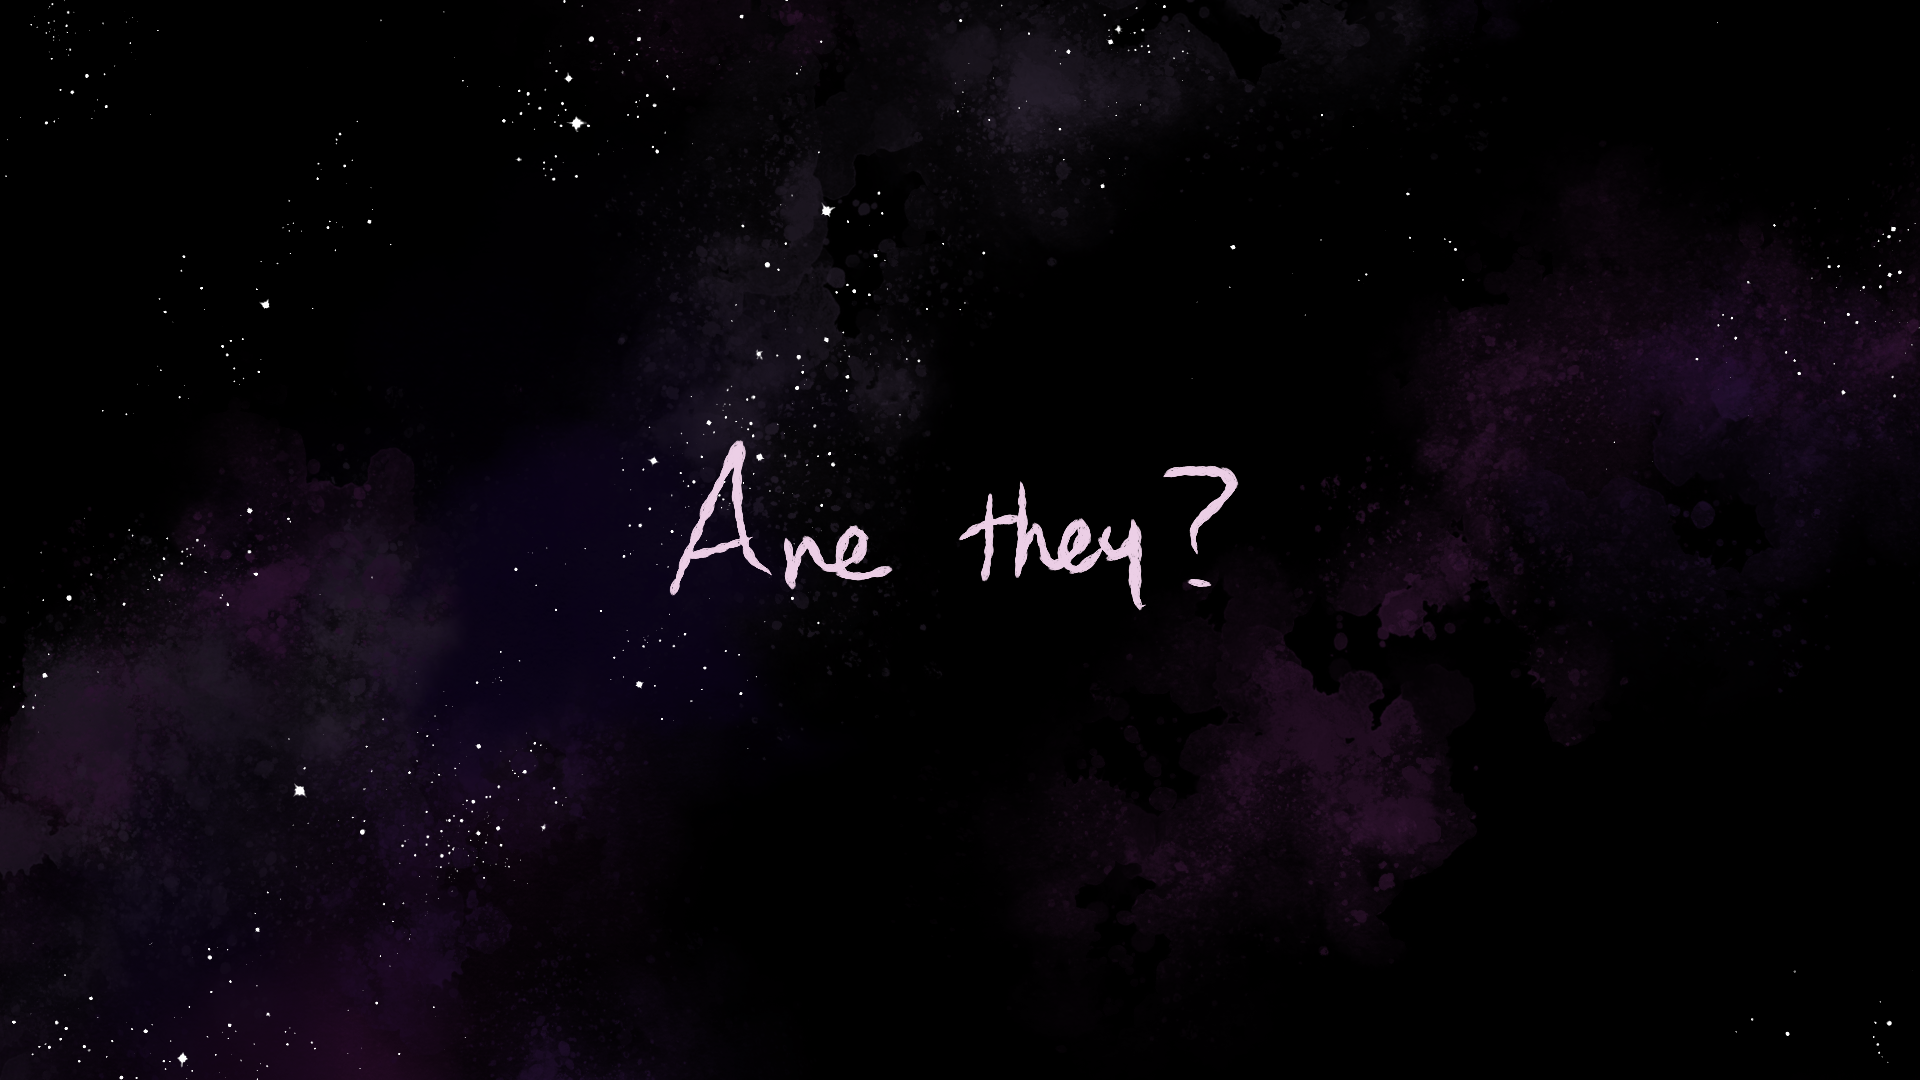 Space -- violet nebulae scudding across the black. Words imposed over the vista: "Are they?"